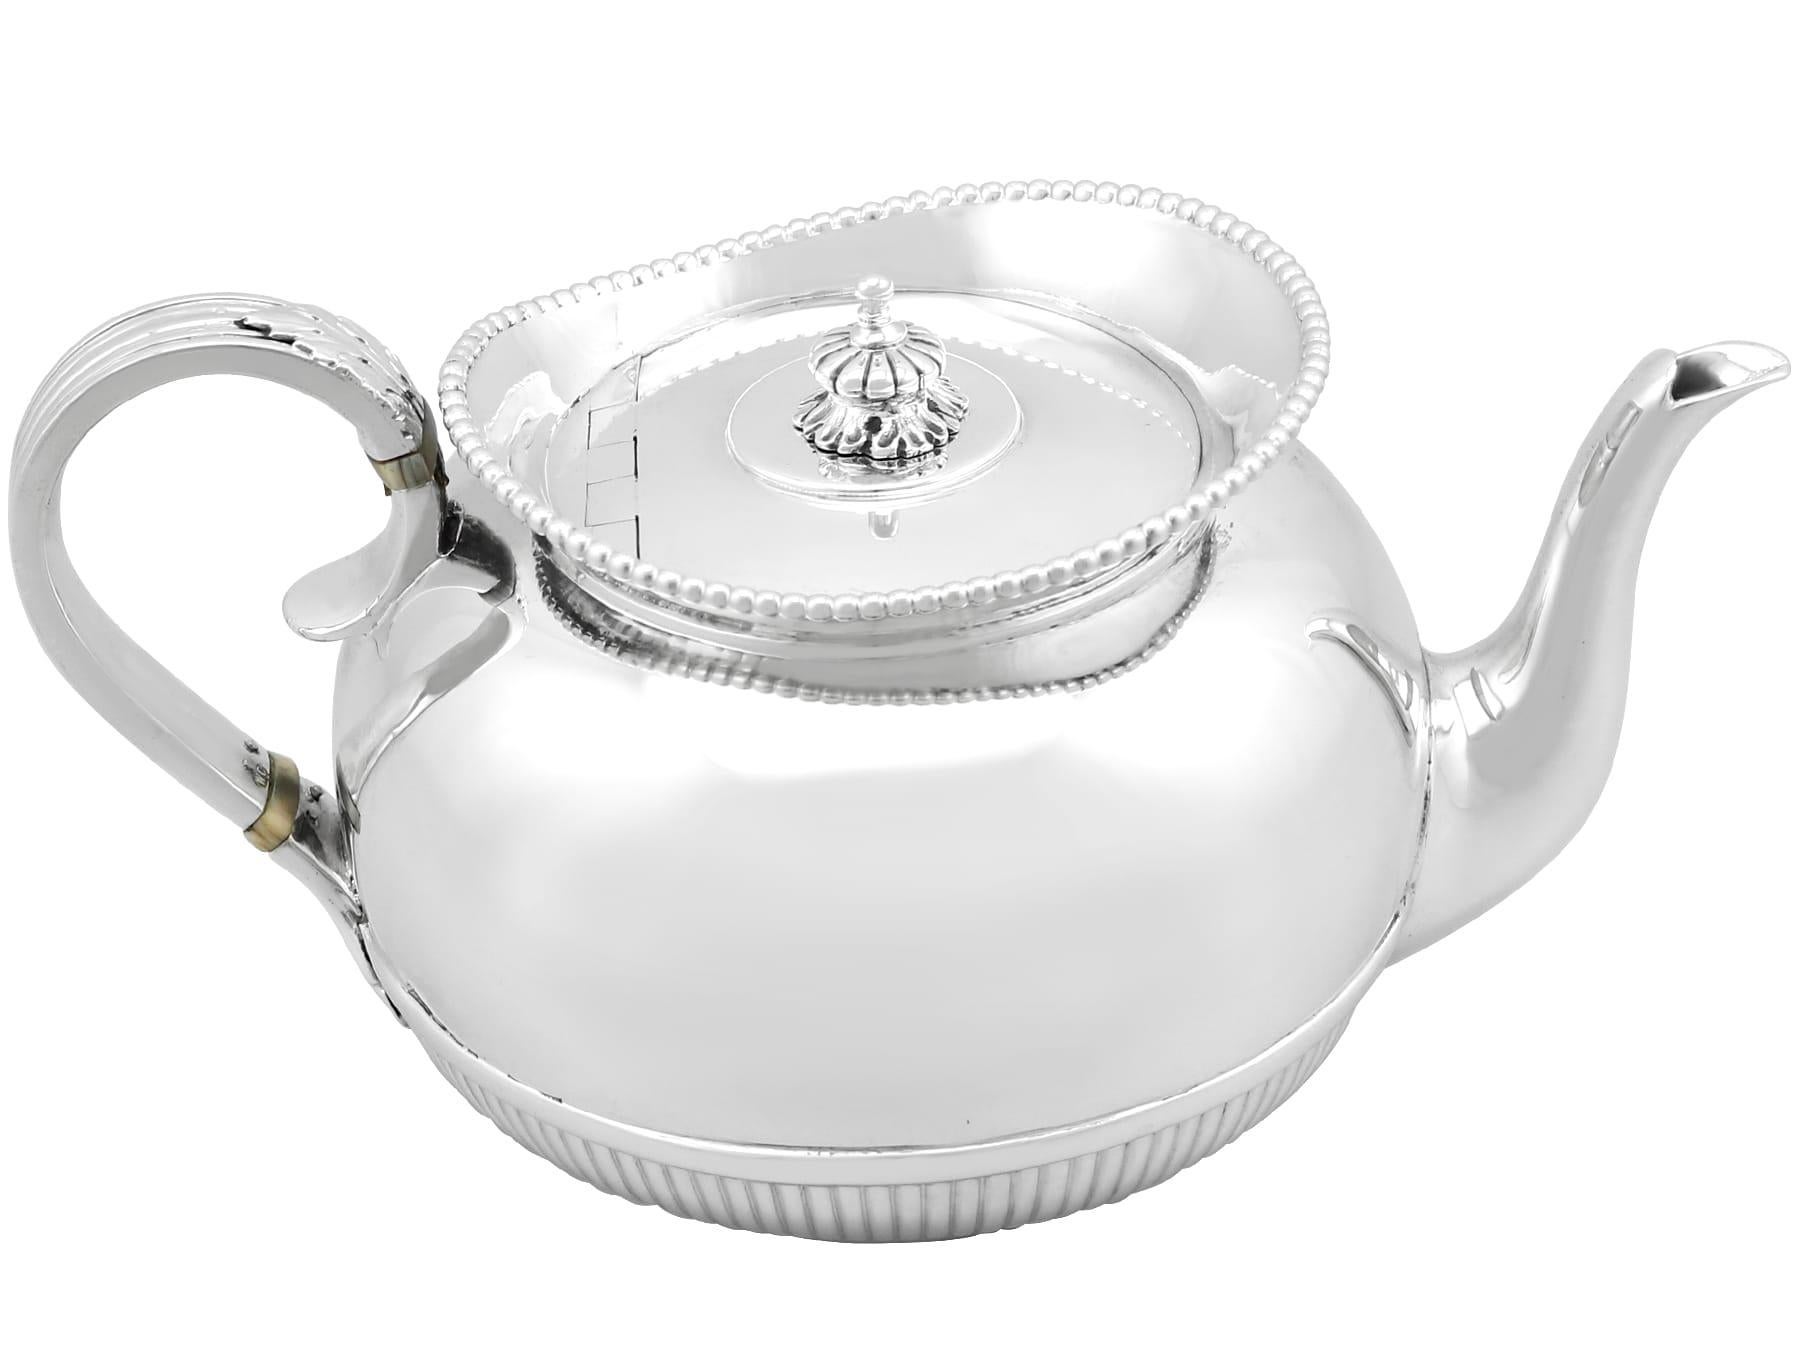 Antique Victorian English Sterling Silver Bachelor Teapot For Sale 2